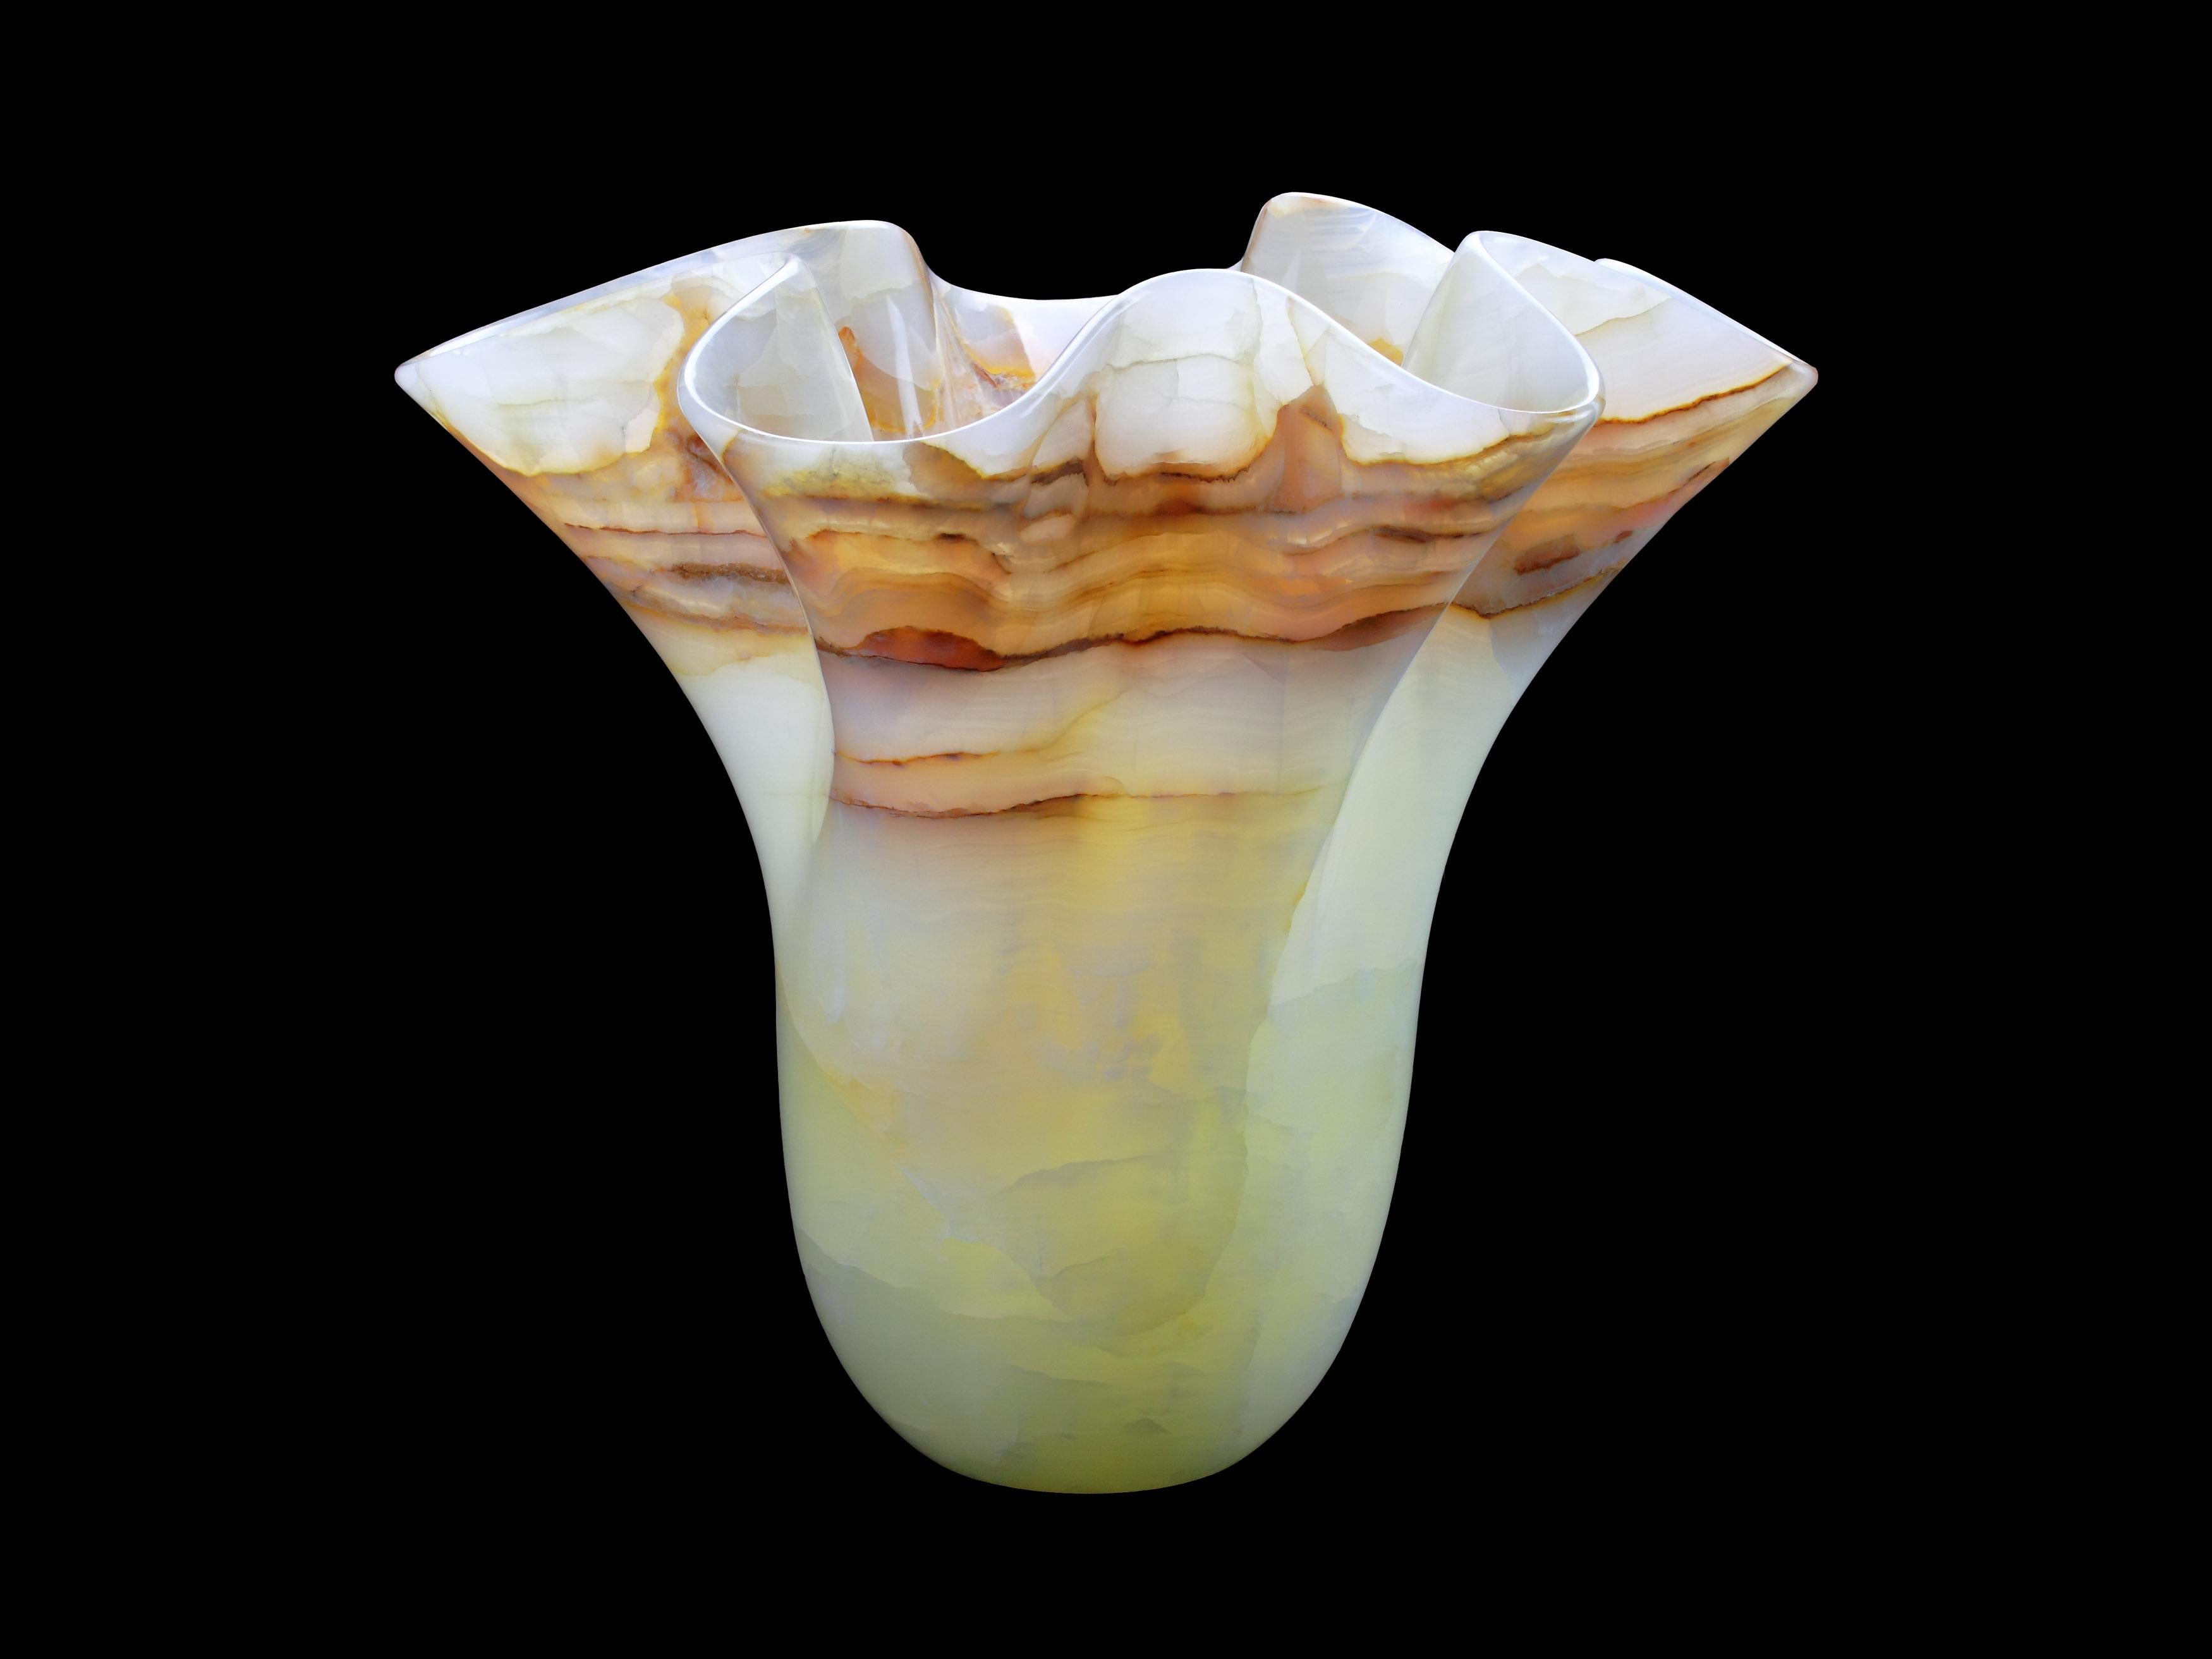 Vase Vessel Sculpture Organic Shape White Onyx Marble Collectible Design Italy For Sale 2